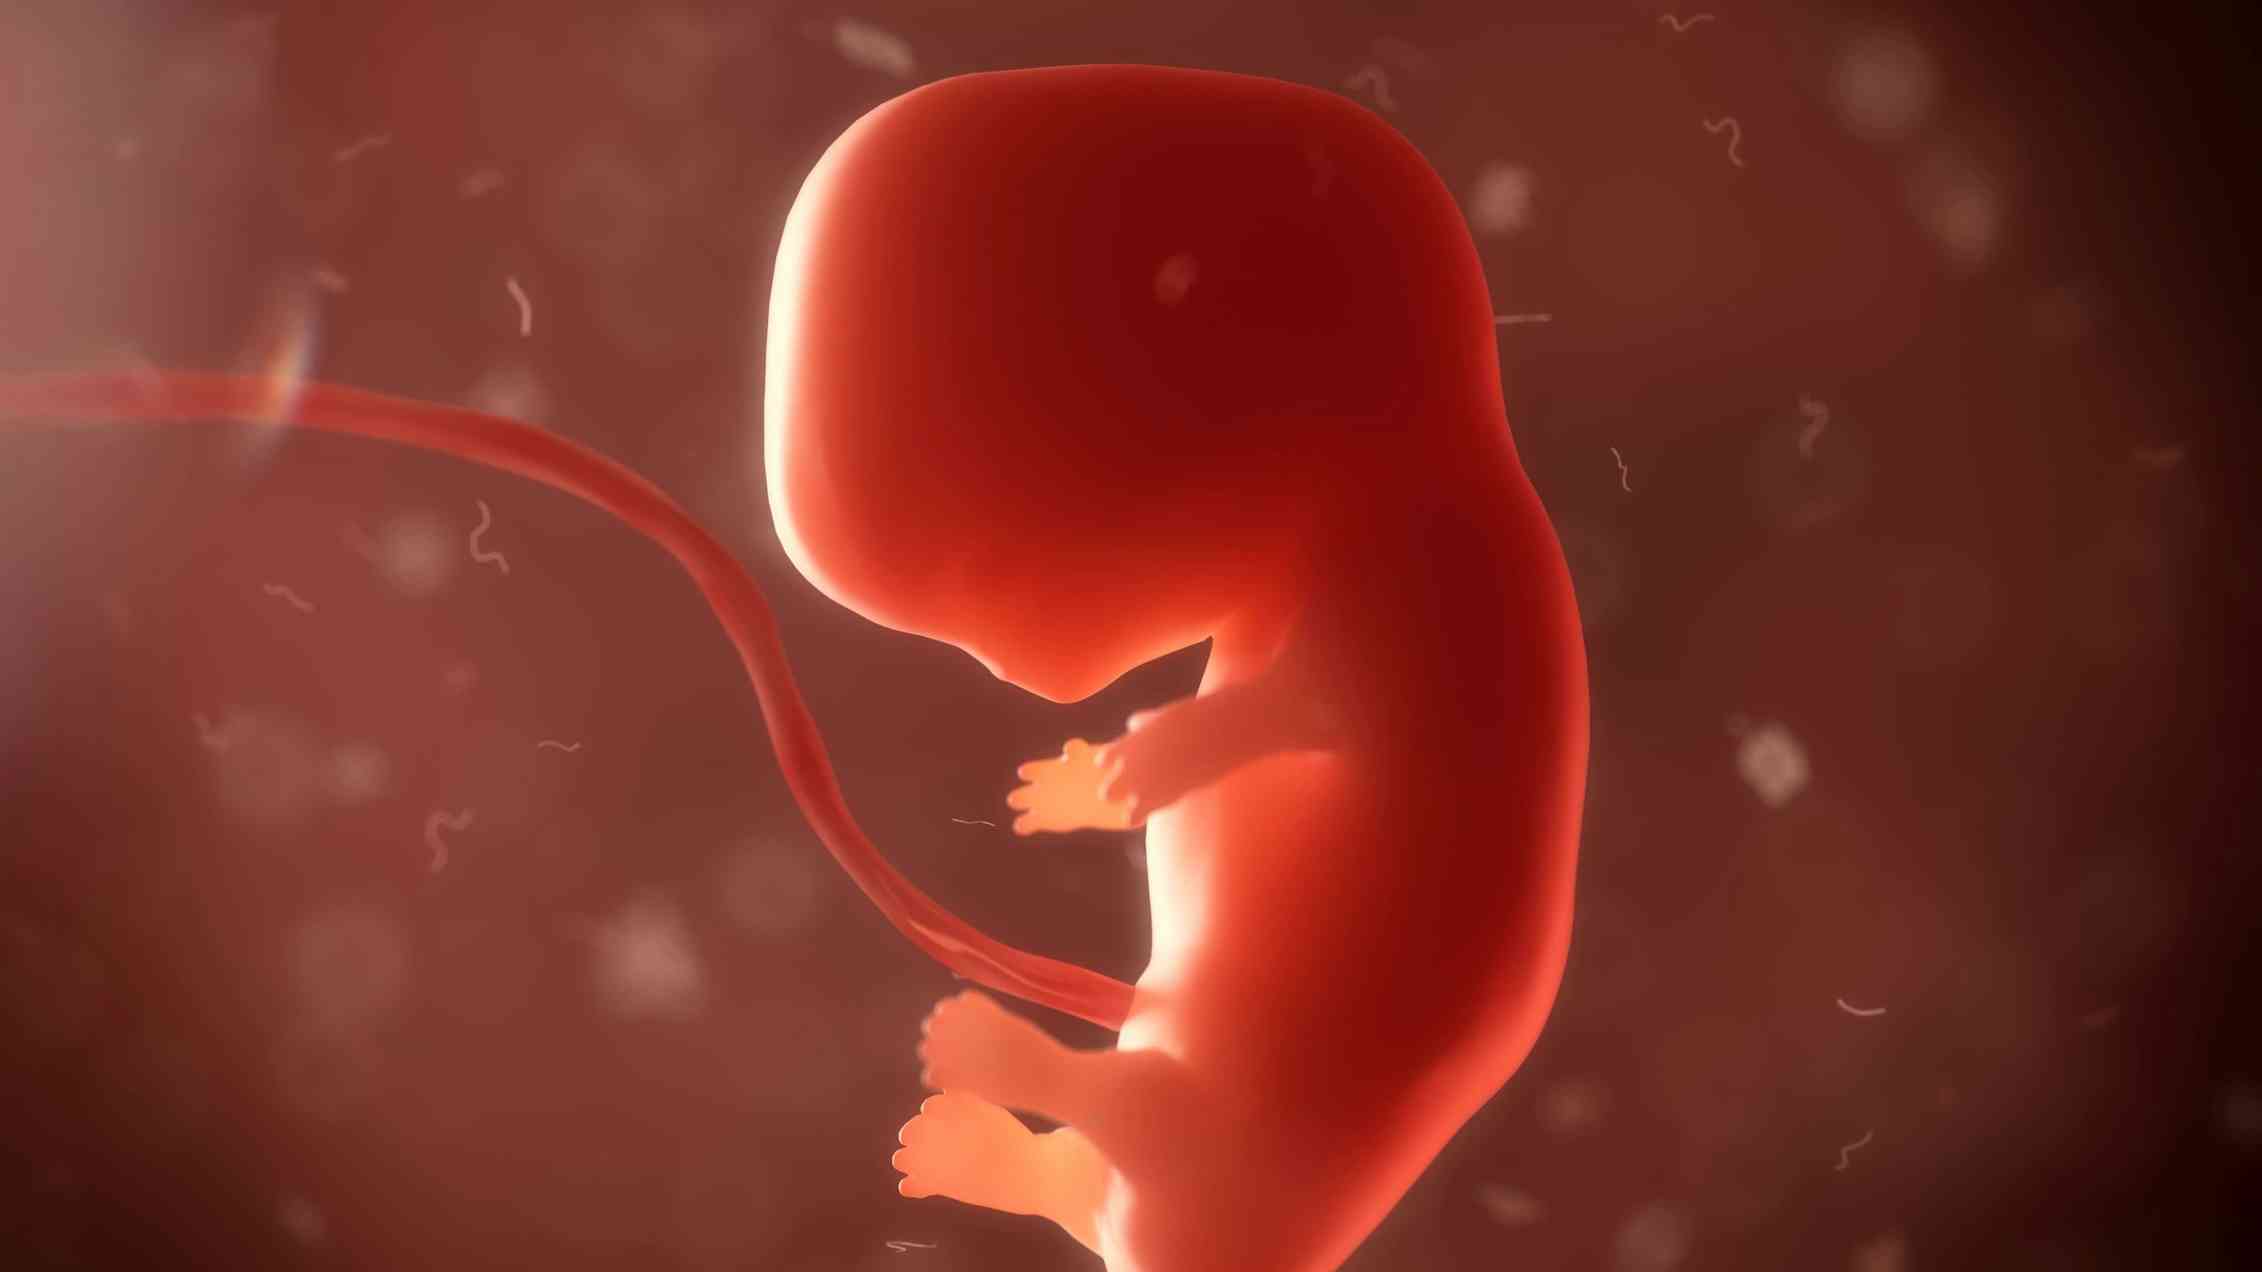 An embryo with umbilical cord